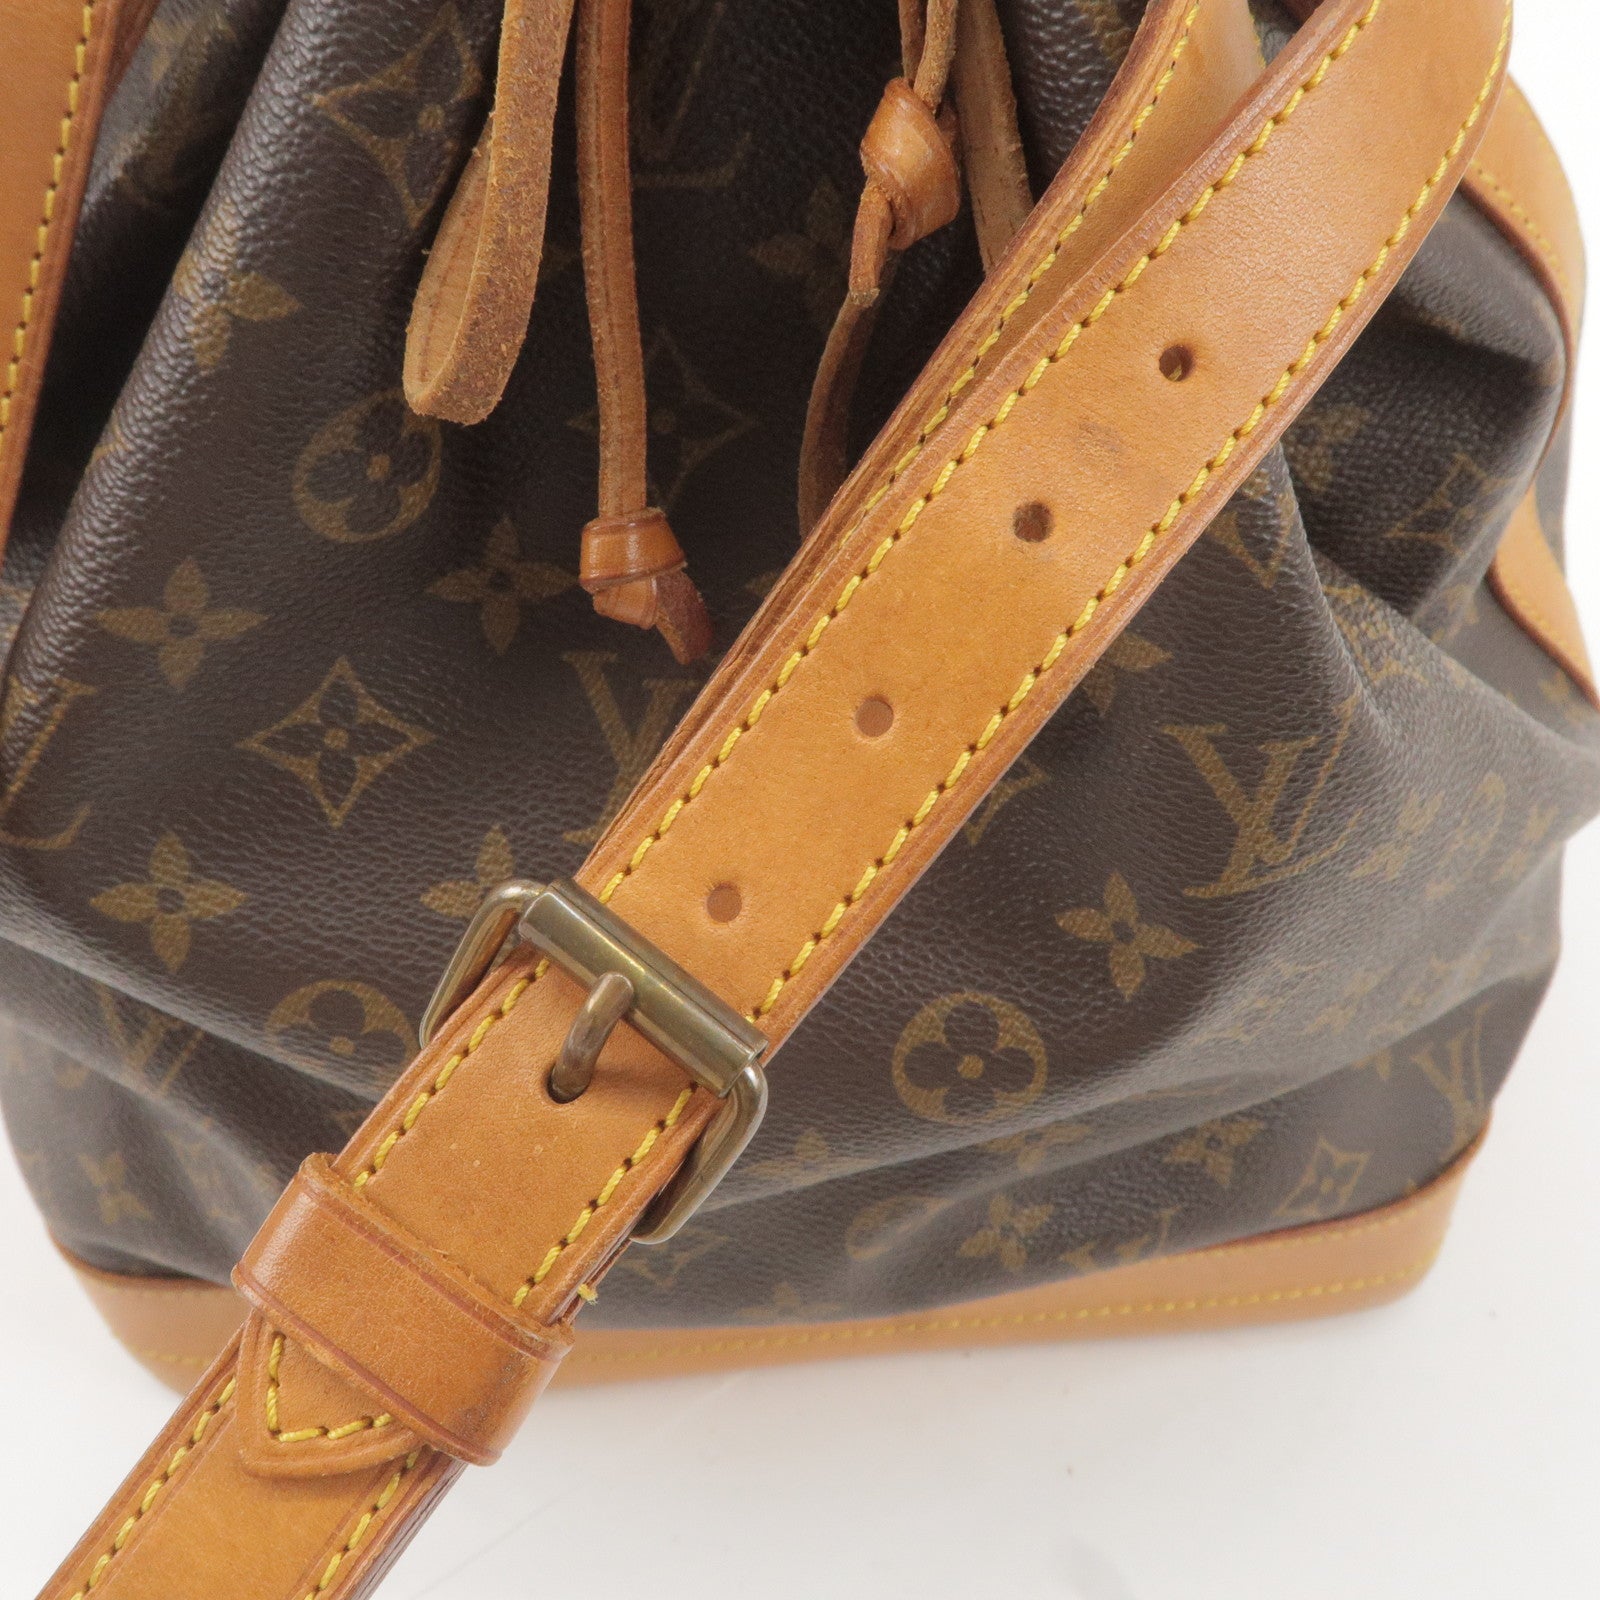 lv beaubourg tote